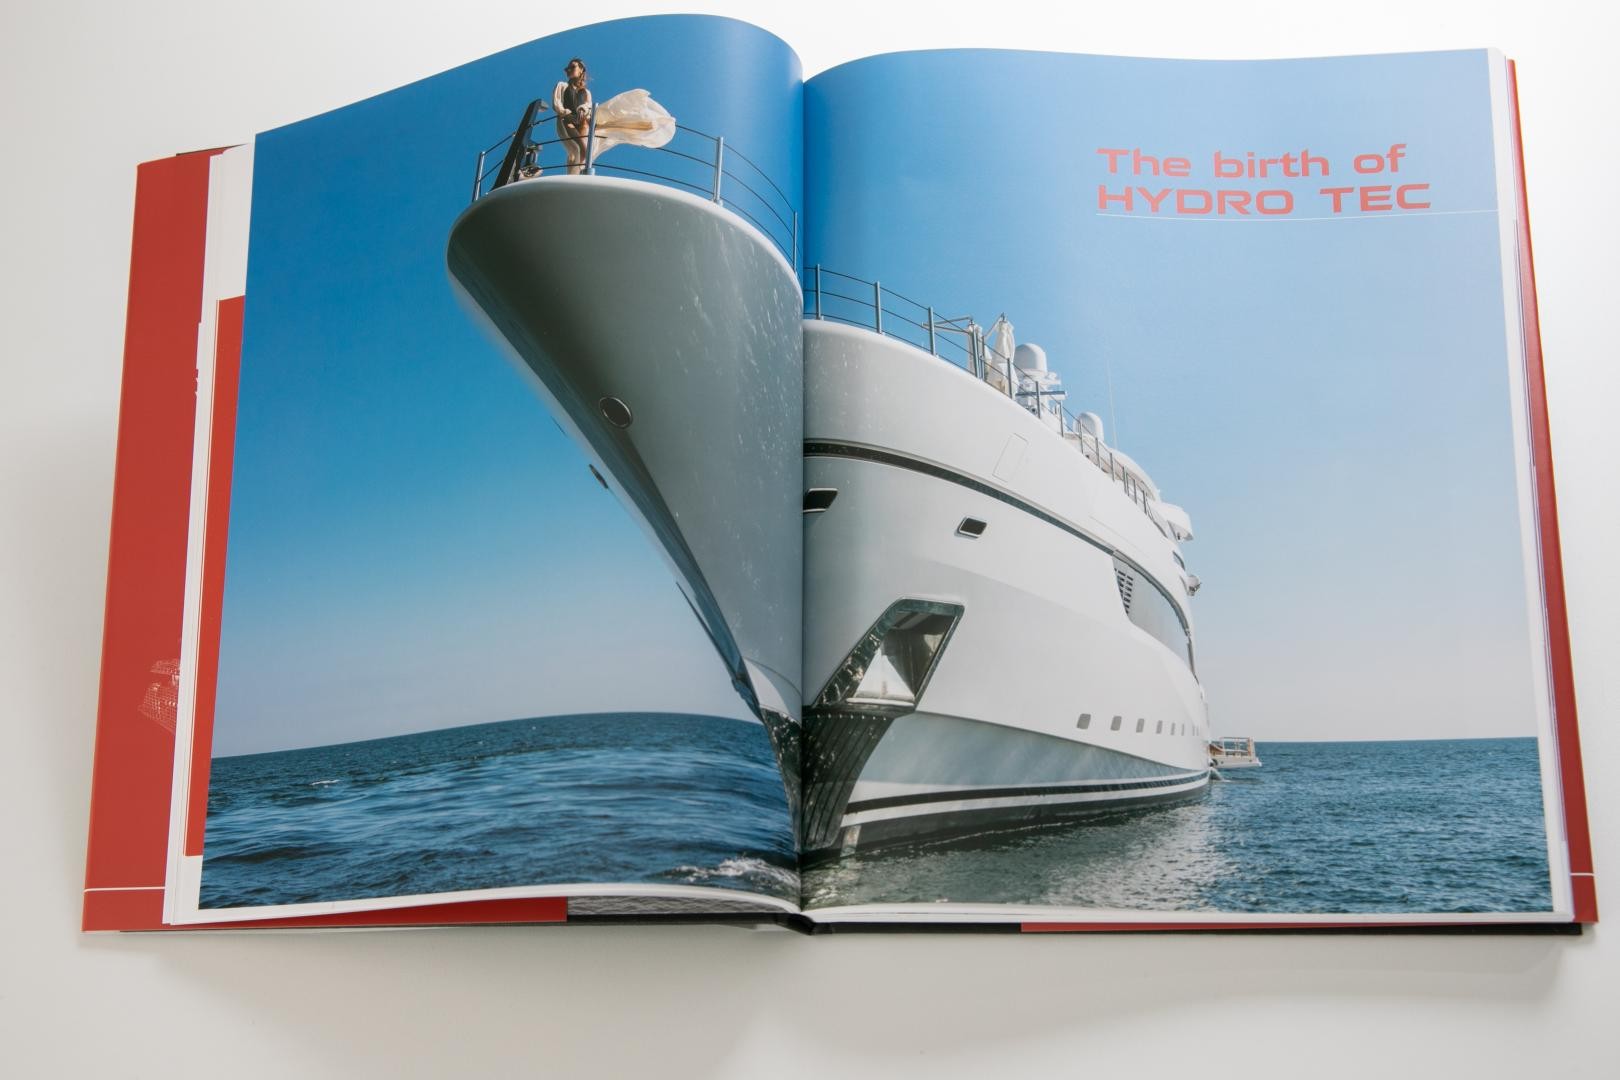 The book celebrating Hydro Tec's 25th anniversary has been published